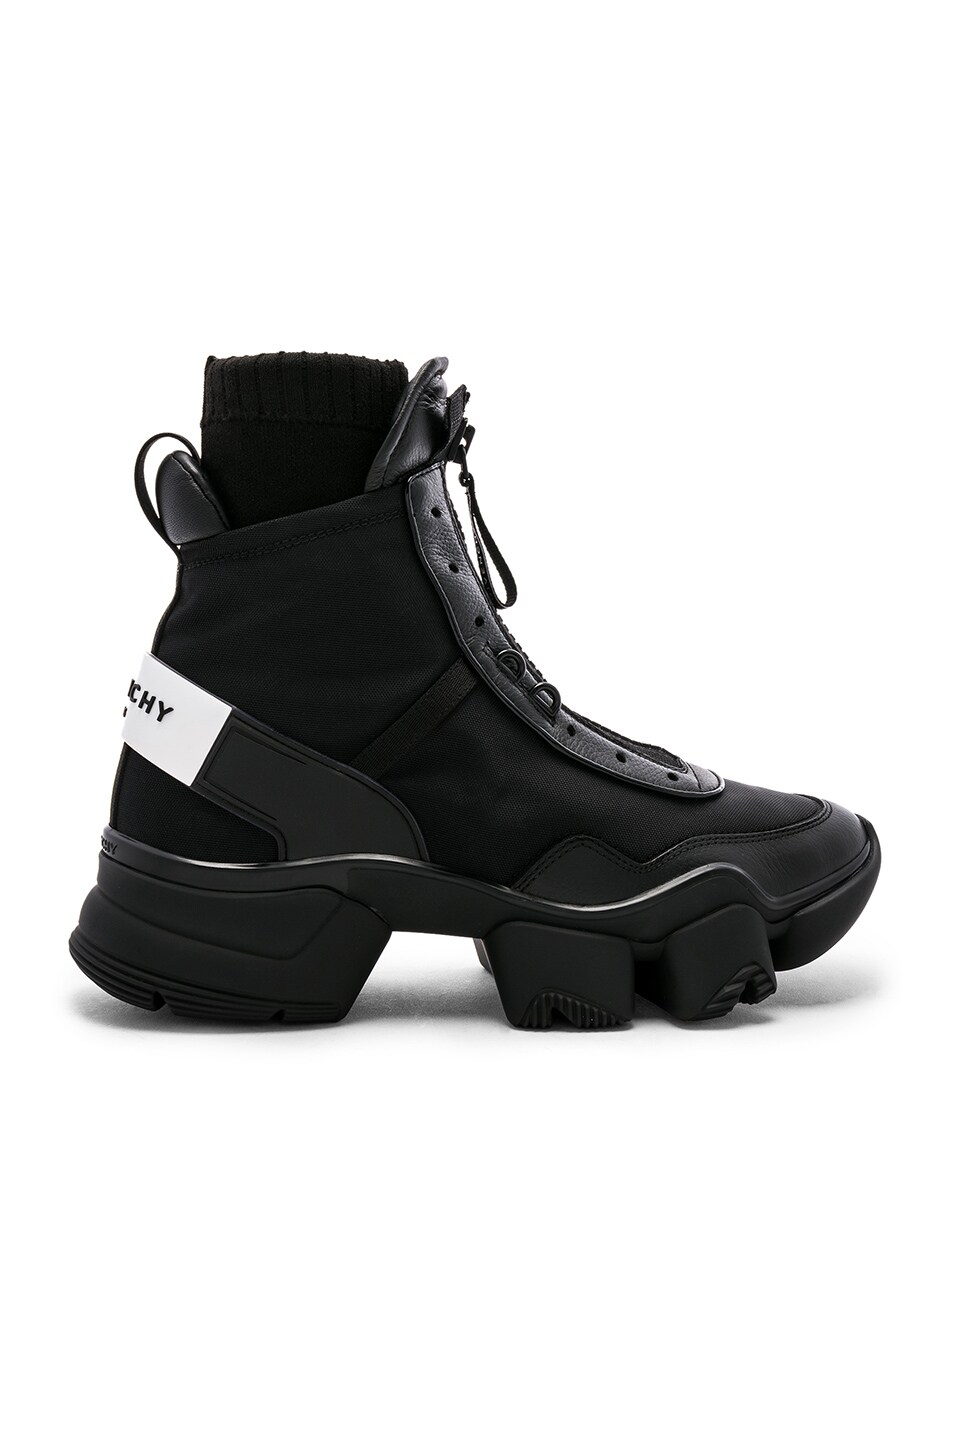 Givenchy Jaw Sneakers in Black | FWRD